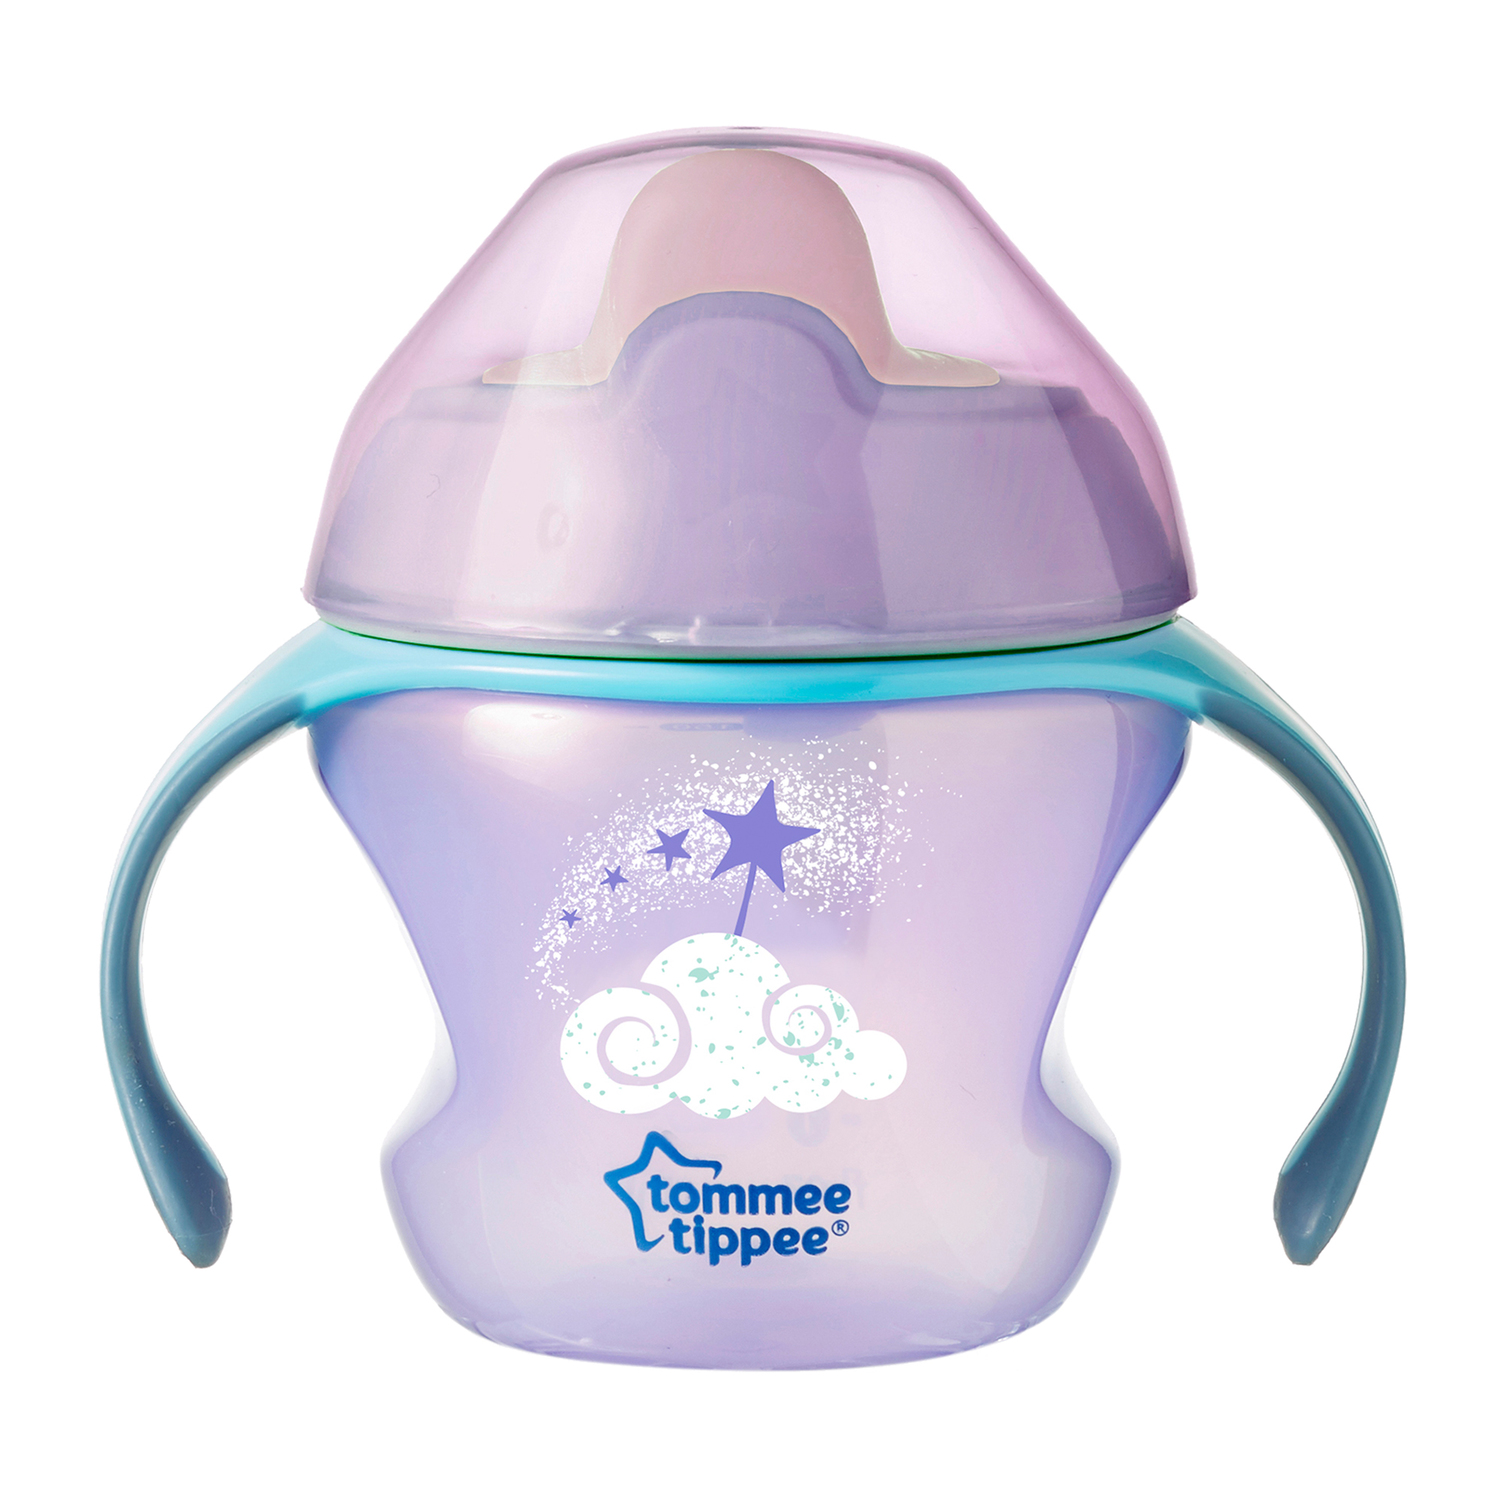 Tommee Tippee First Training Cup 4md+, Lilla, 1 stk.